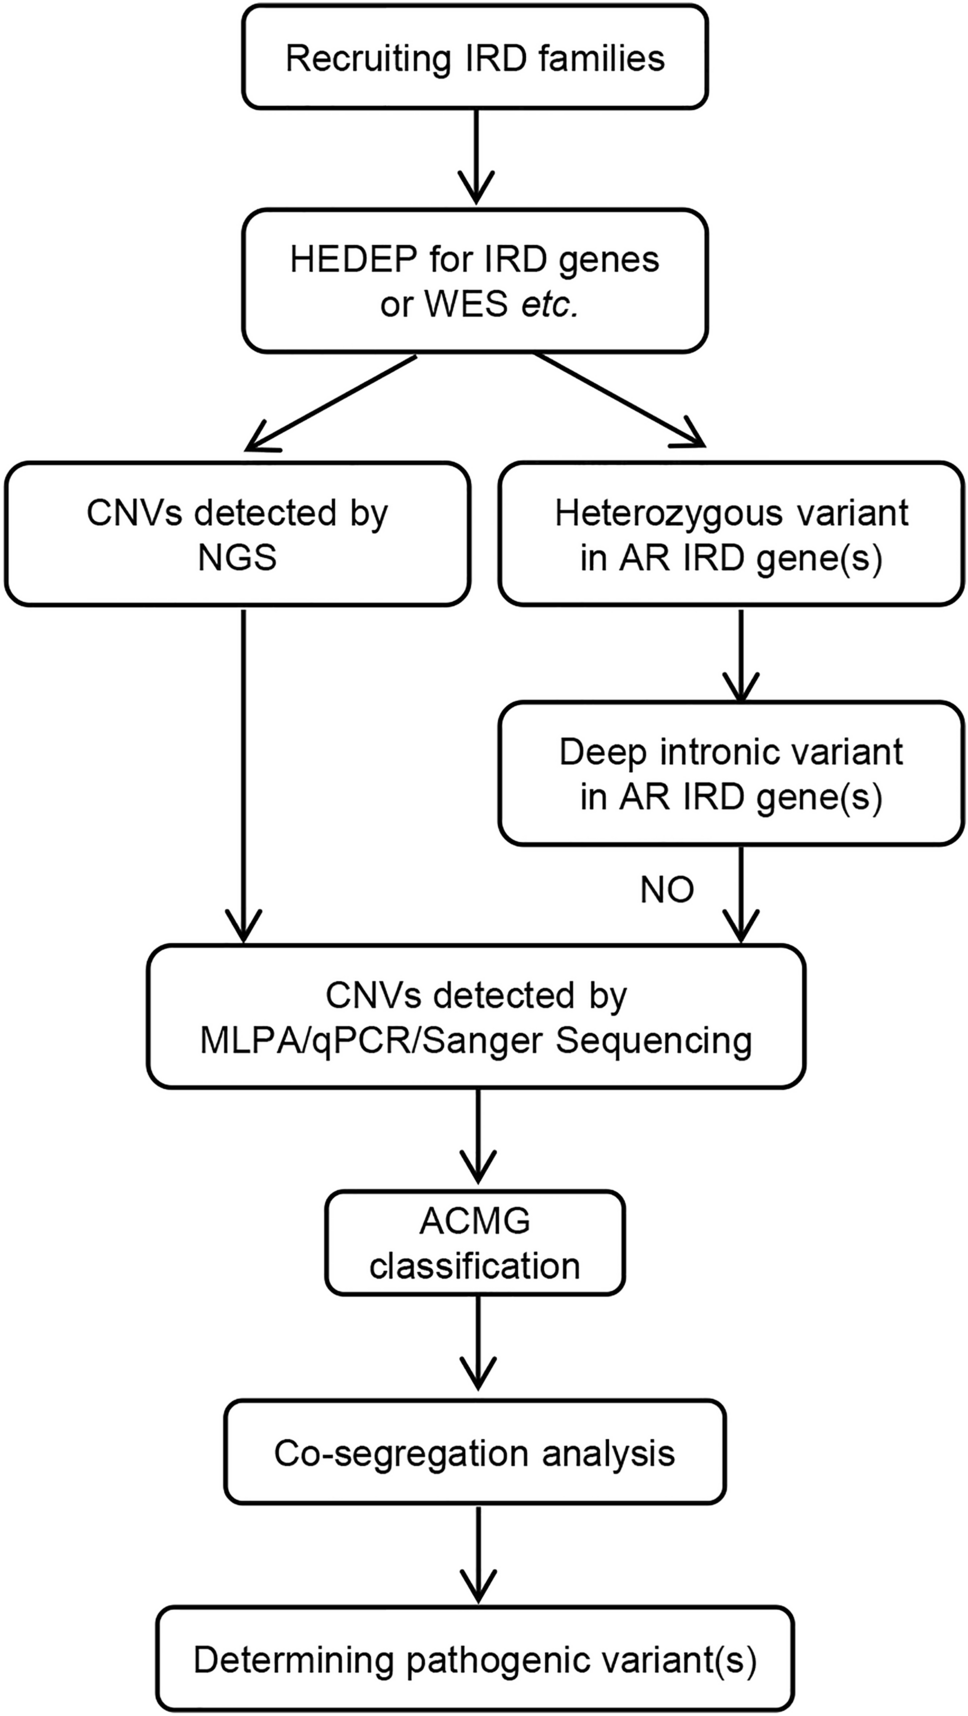 Screening copy number variations in 35 unsolved inherited retinal disease families